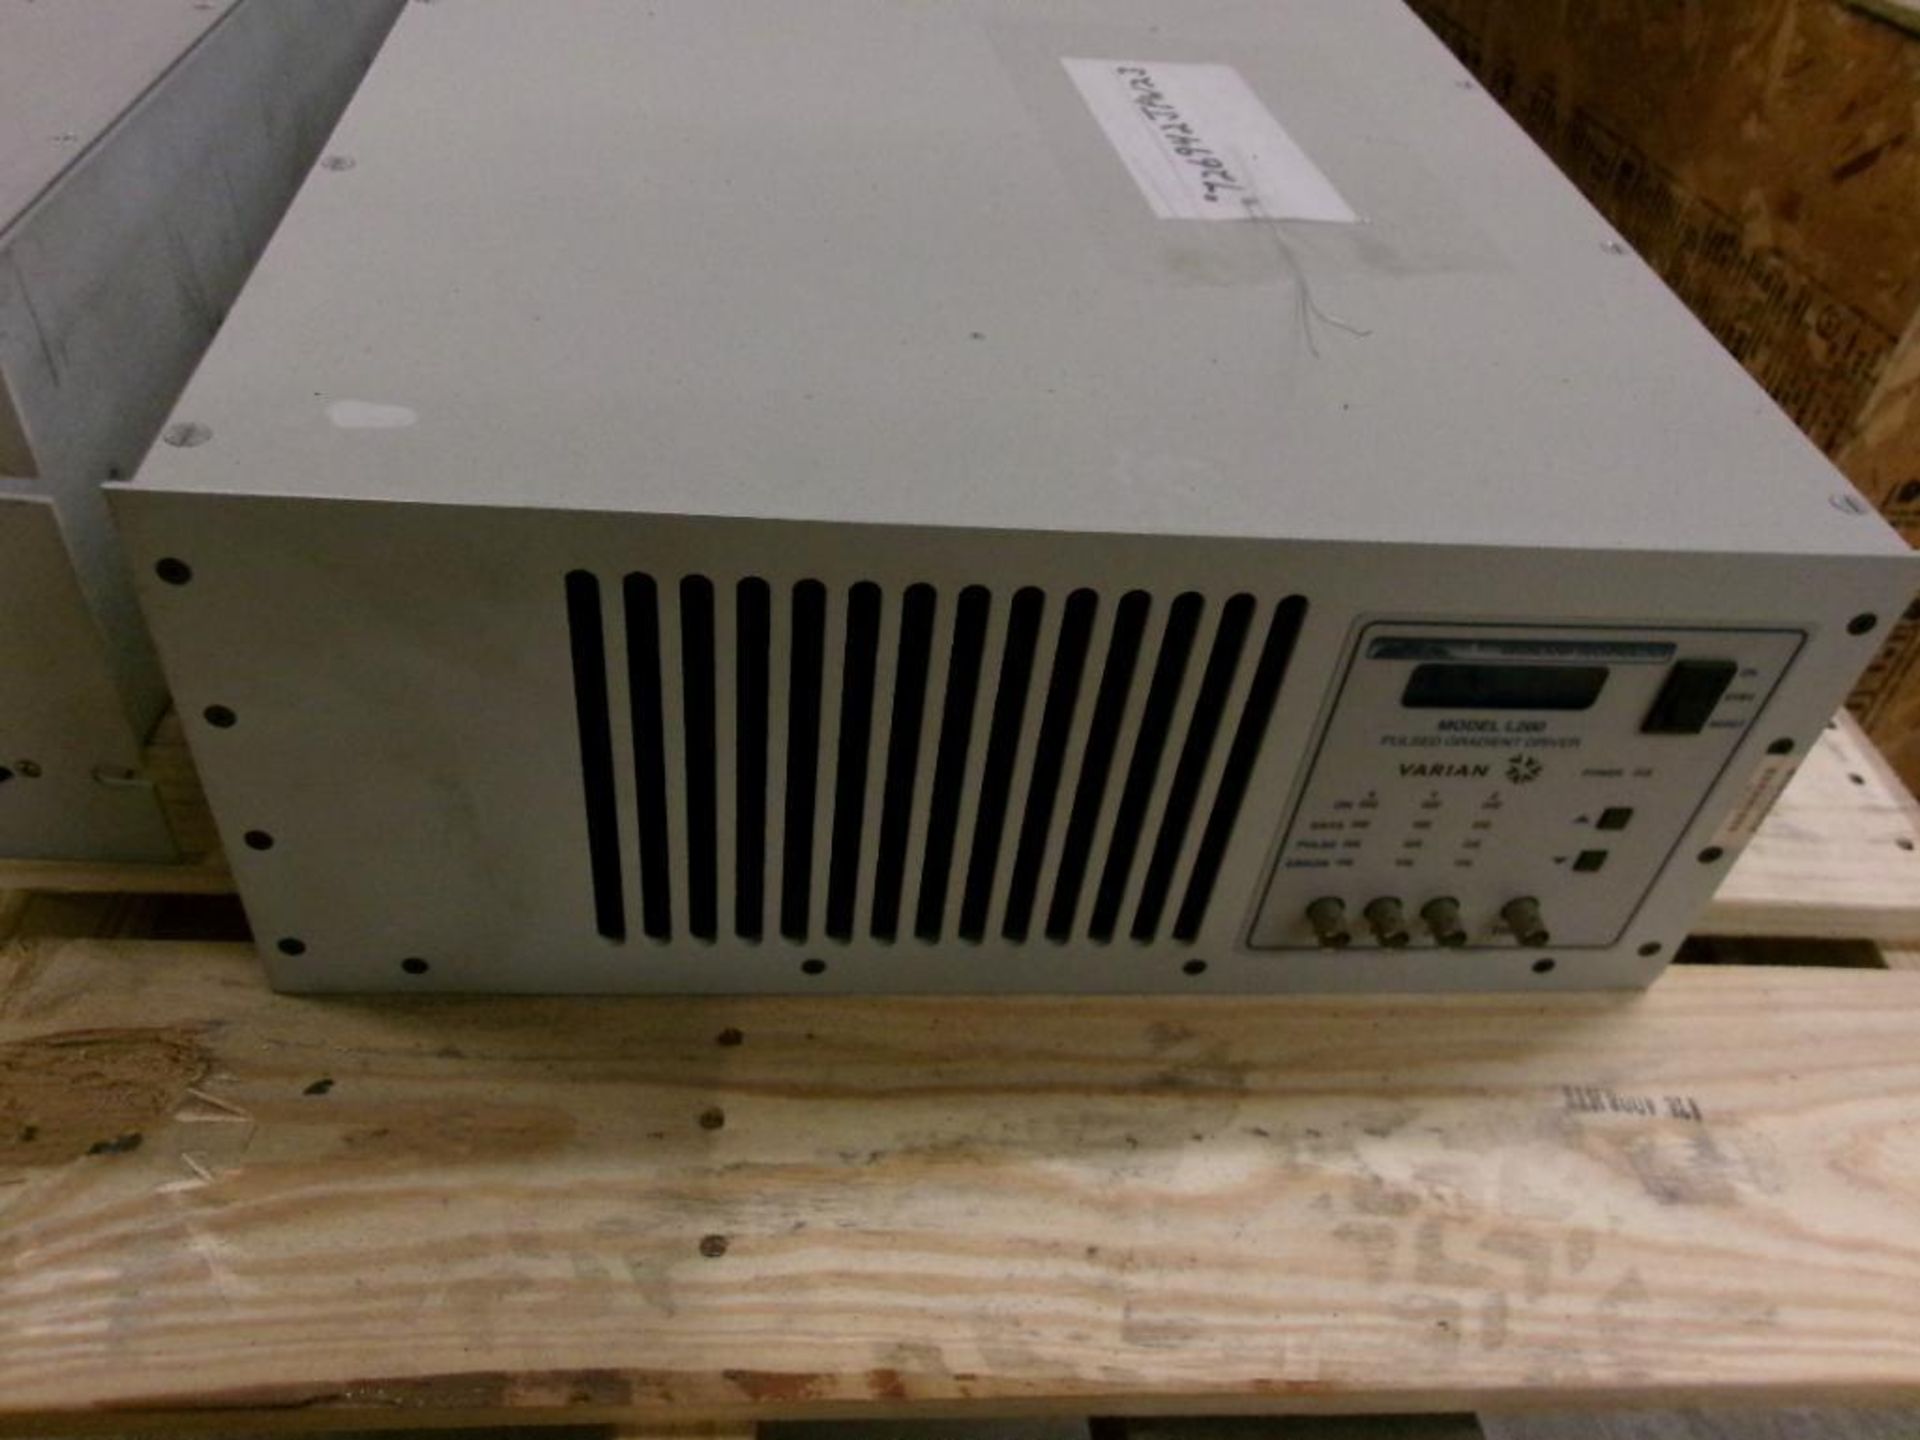 Herley-AMT 3200 Power Supply, Model 3200, S/N H007472 (New) - Image 4 of 4